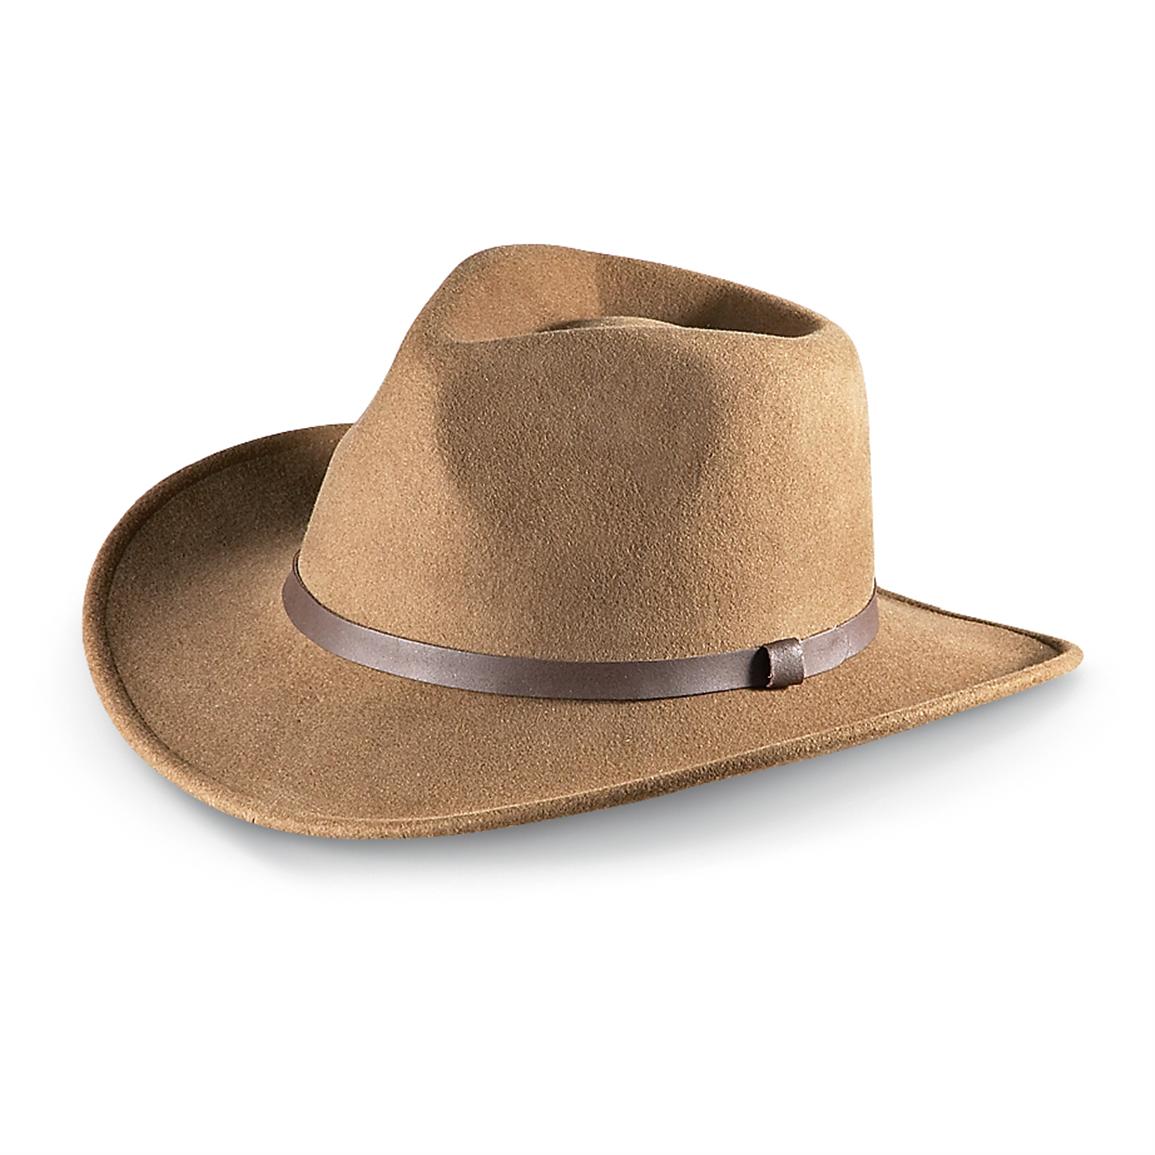 Henschel® Outback Crusher Hat 190442 Hats And Caps At Sportsmans Guide